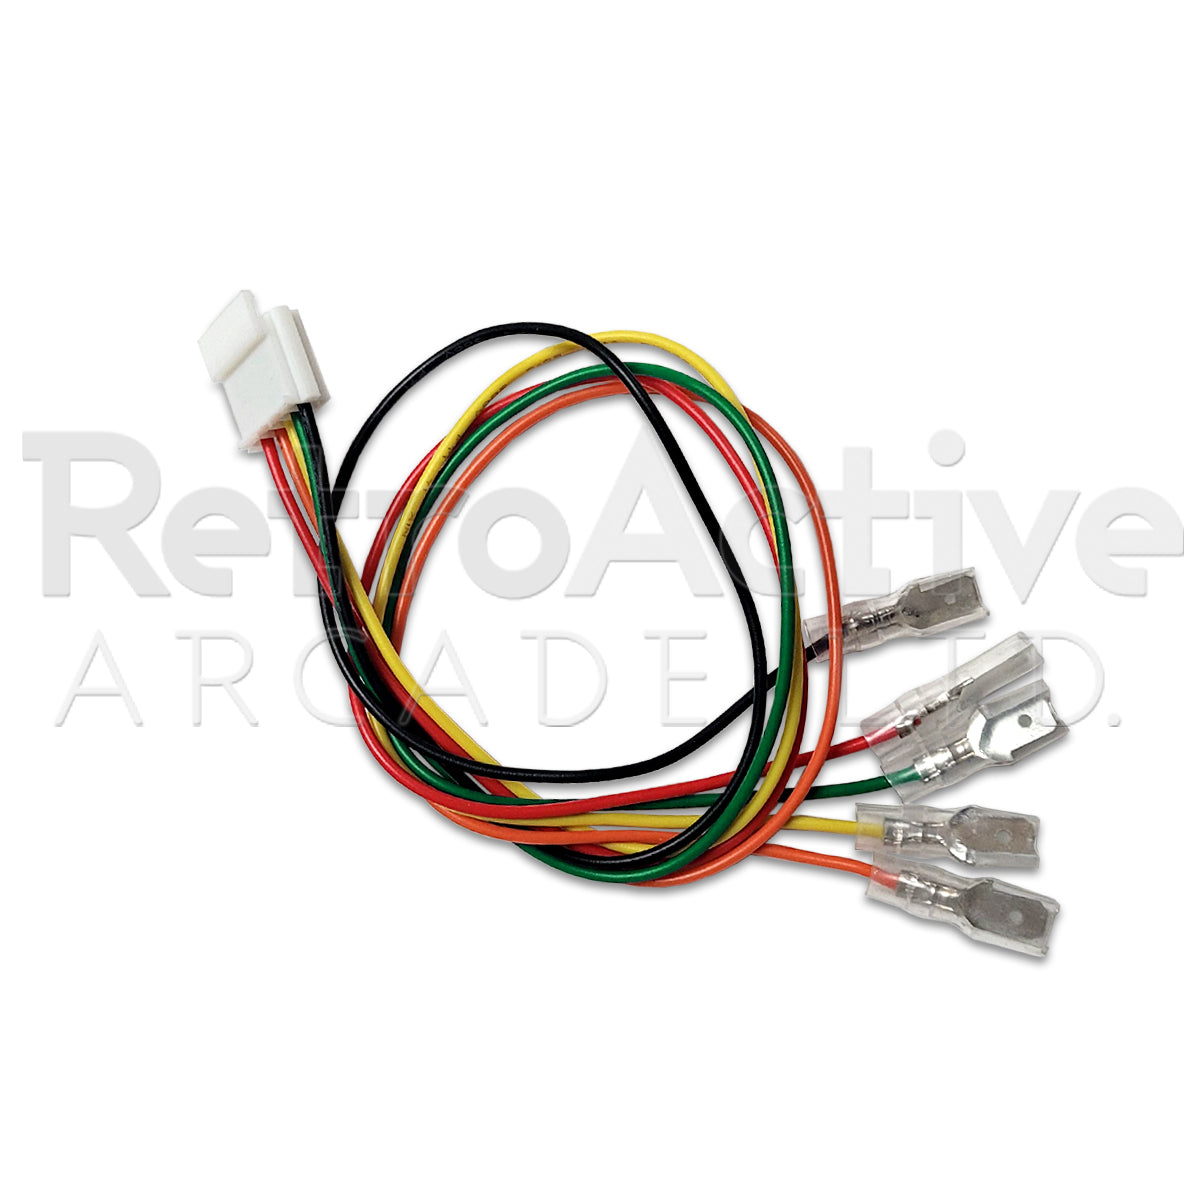 5 Pin to Male .187" Terminal Adaptor Harness Wiring & Harnesses Universal - Retro Active Arcade